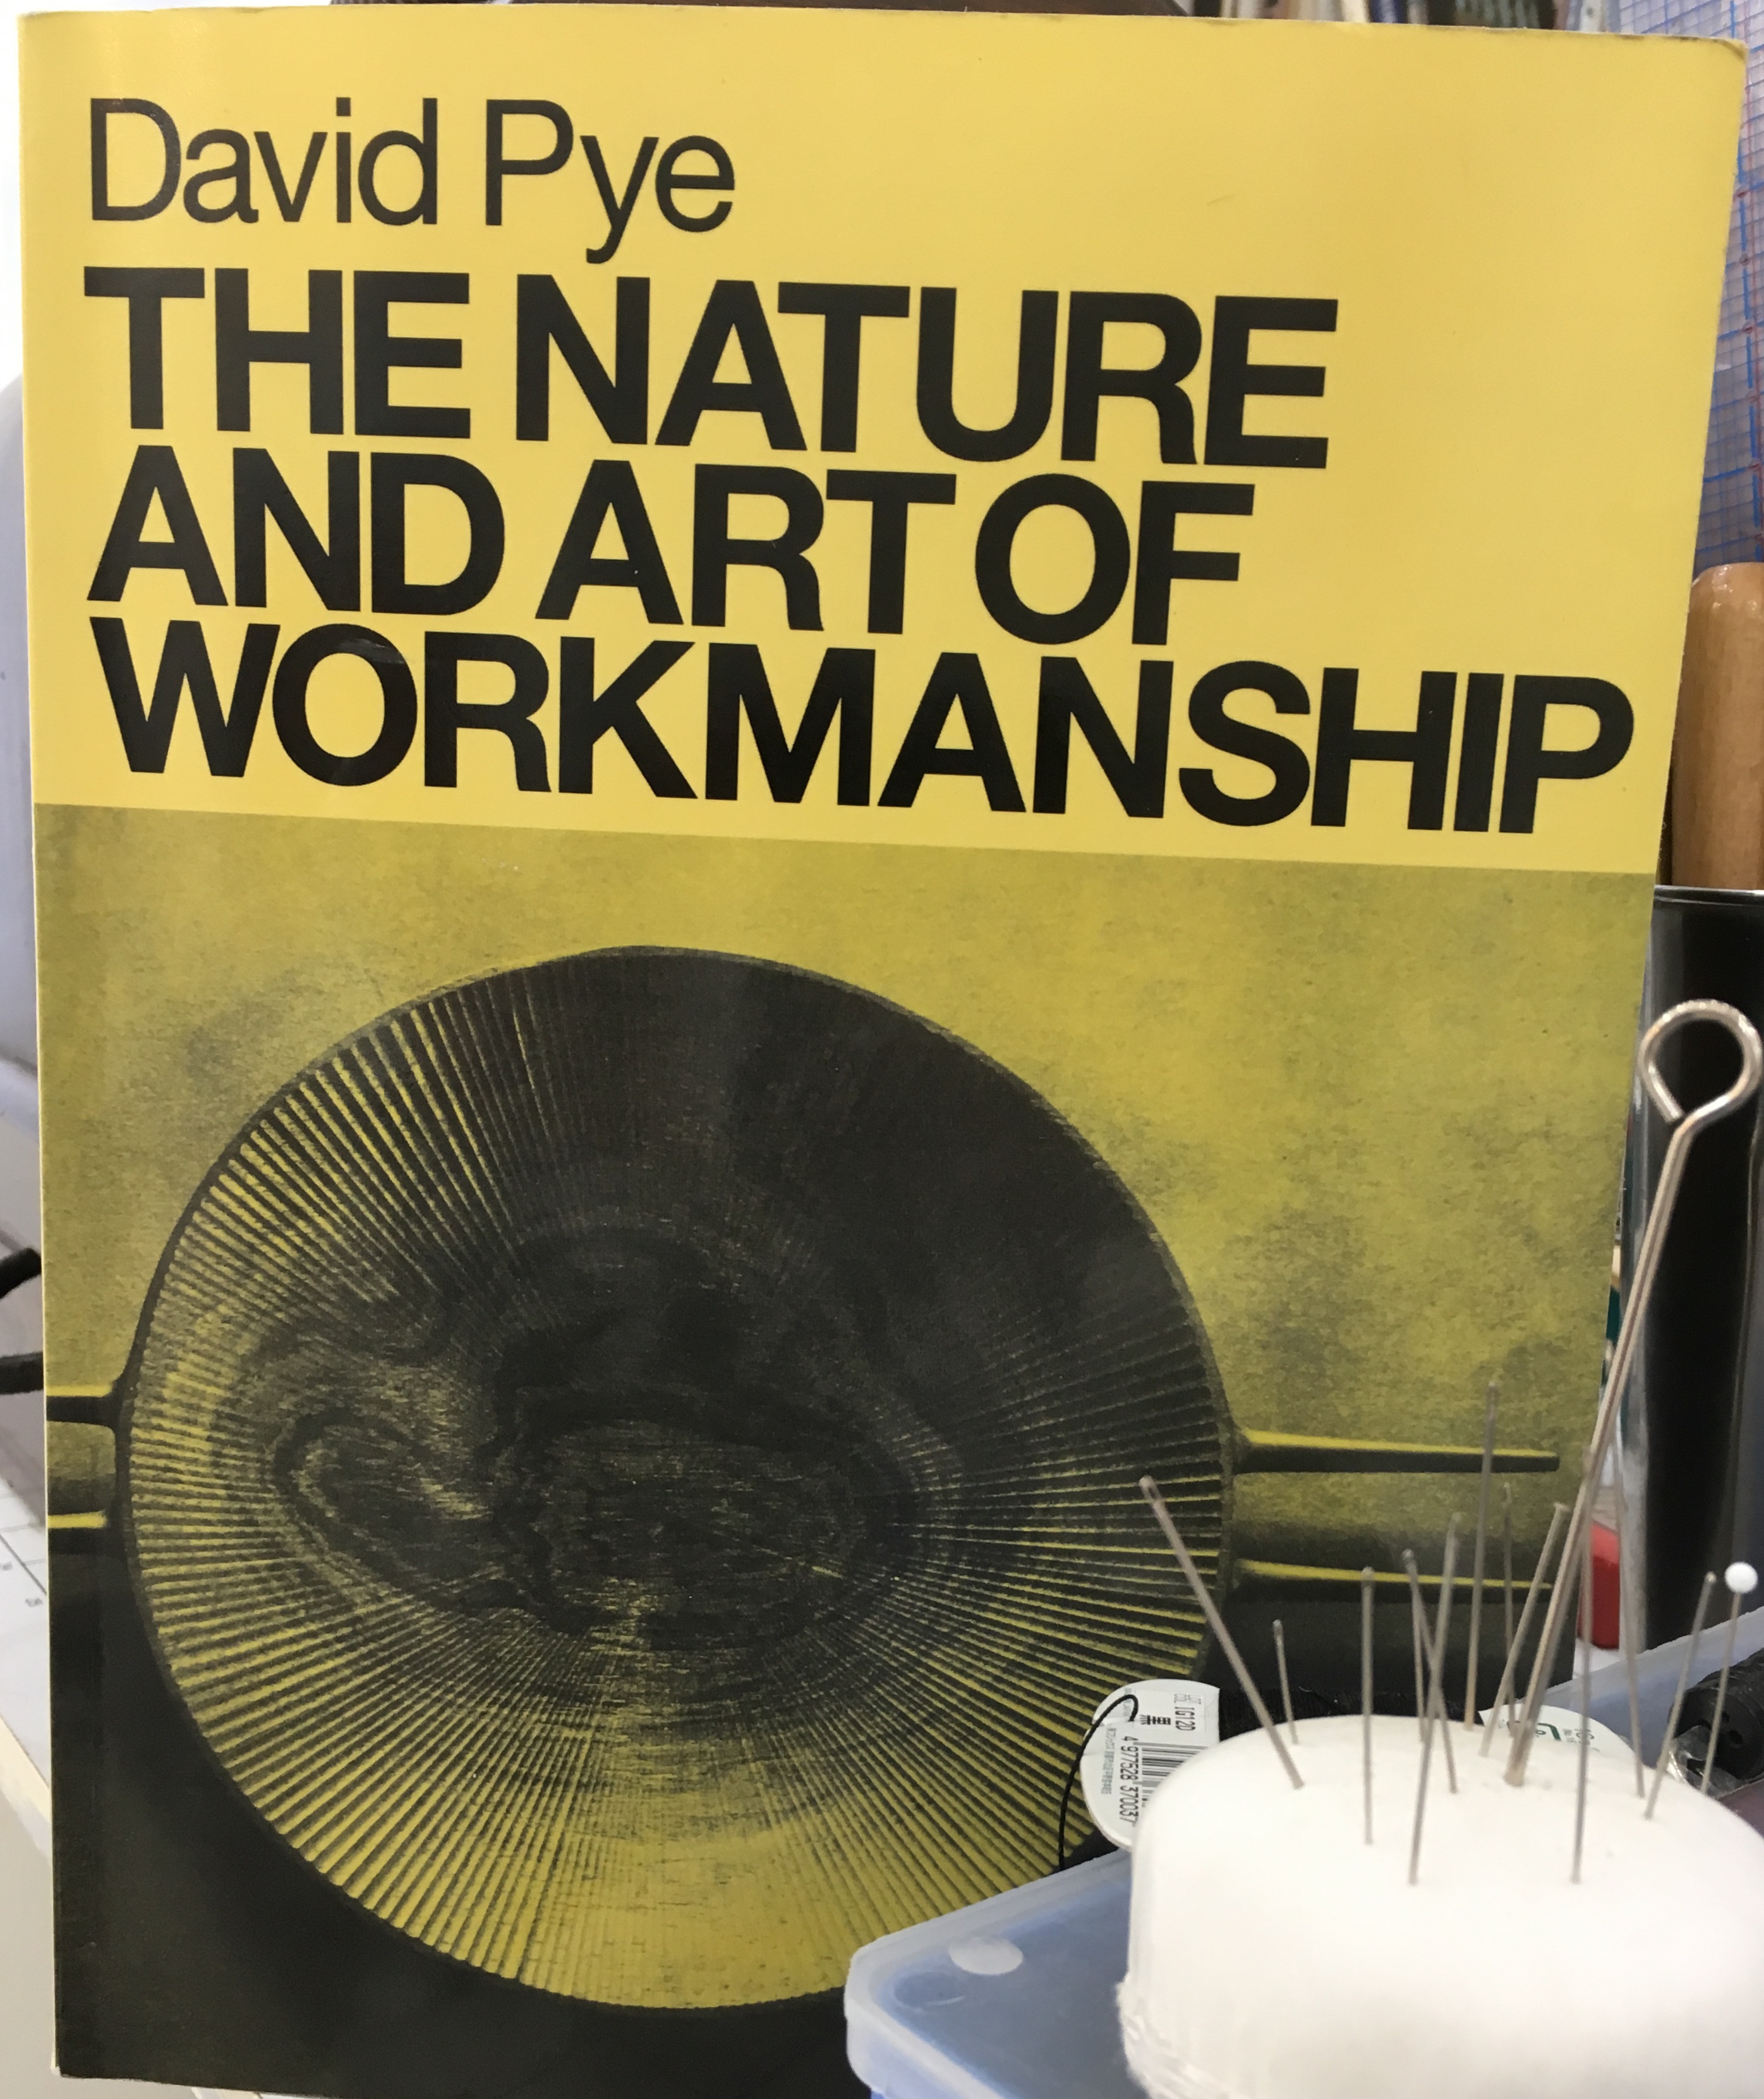 A photograph of David Pye's seminal book The Nature and Art of Workmanship photographed at the Tchad Workroom library in Chicago that hosts sewing classes in Chicago